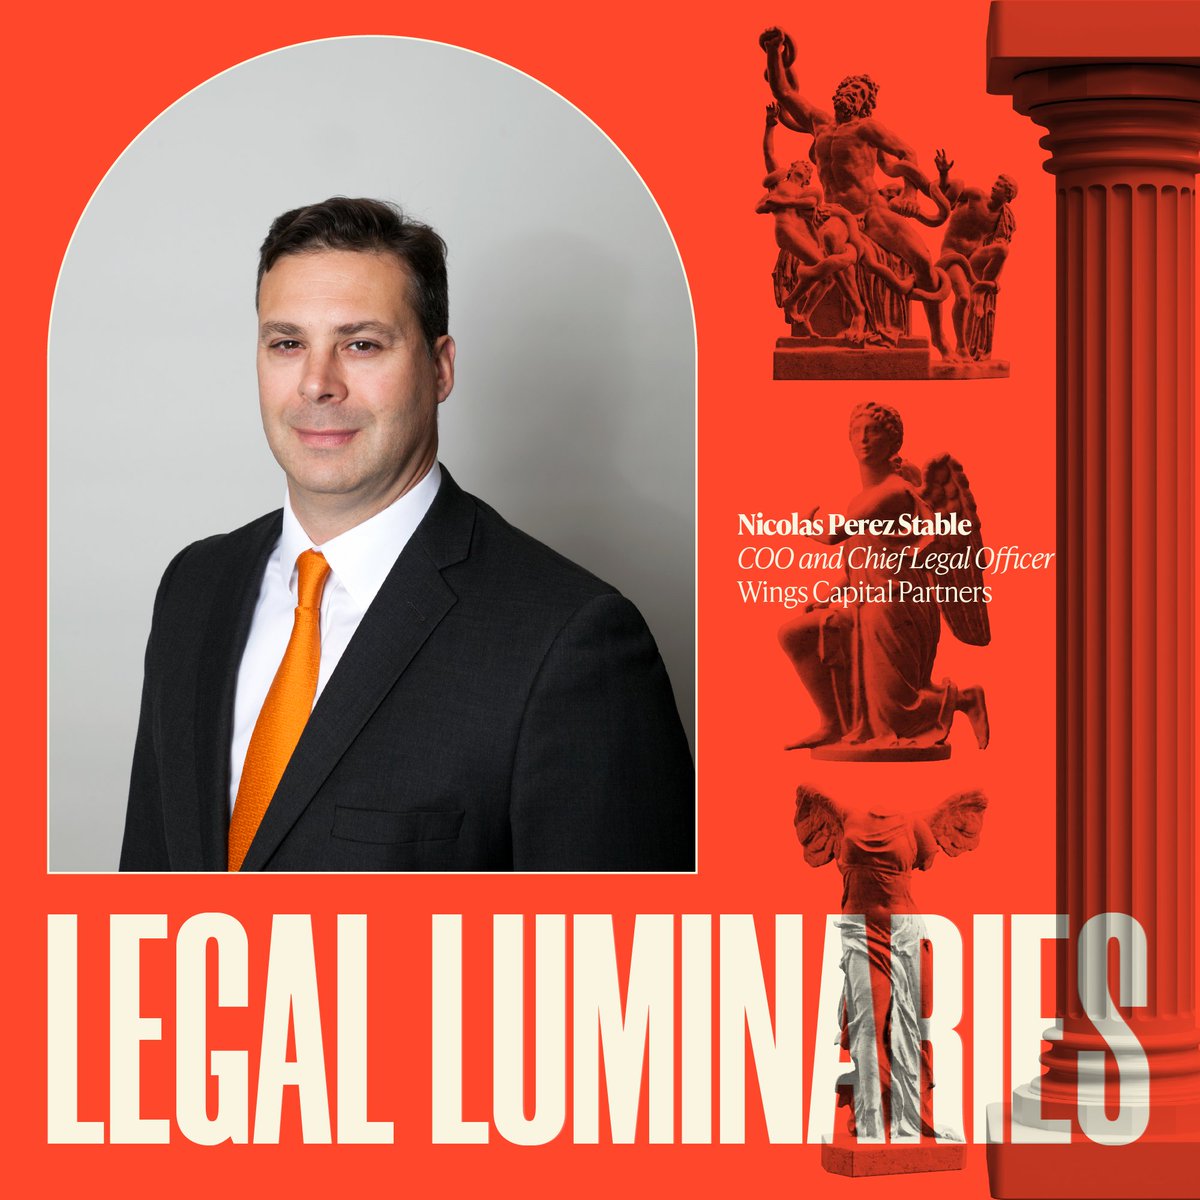 LEGAL LUMINARIES ⚖️💼: Nicolas Perez Stable reflects on the choices that helped him grow into more significant roles in private equity. Read more: hubs.la/Q02wy1ml0 #HispanicExecMag #LegalLuminaries #DiversityandInclusion